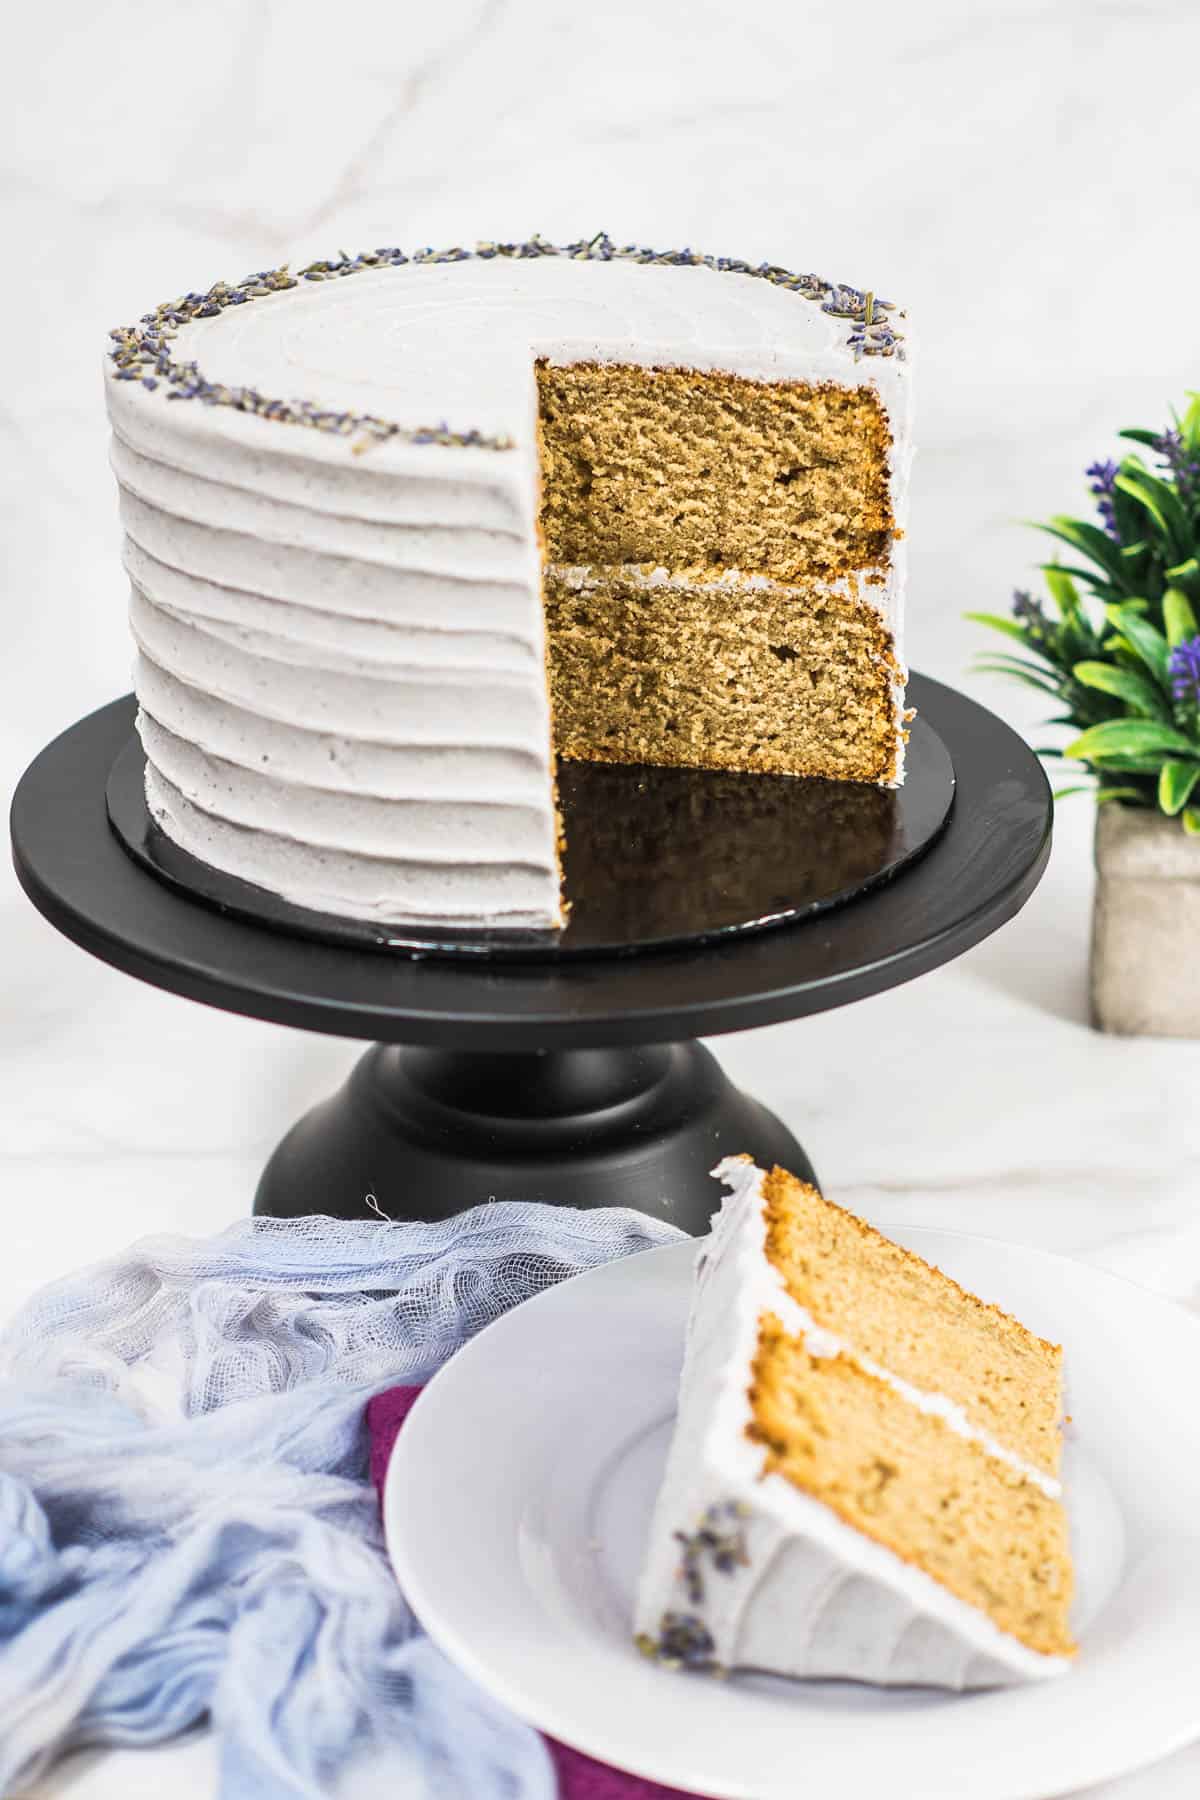 A two tier frosted cake on a black stand, with a large slice of cake cut out.